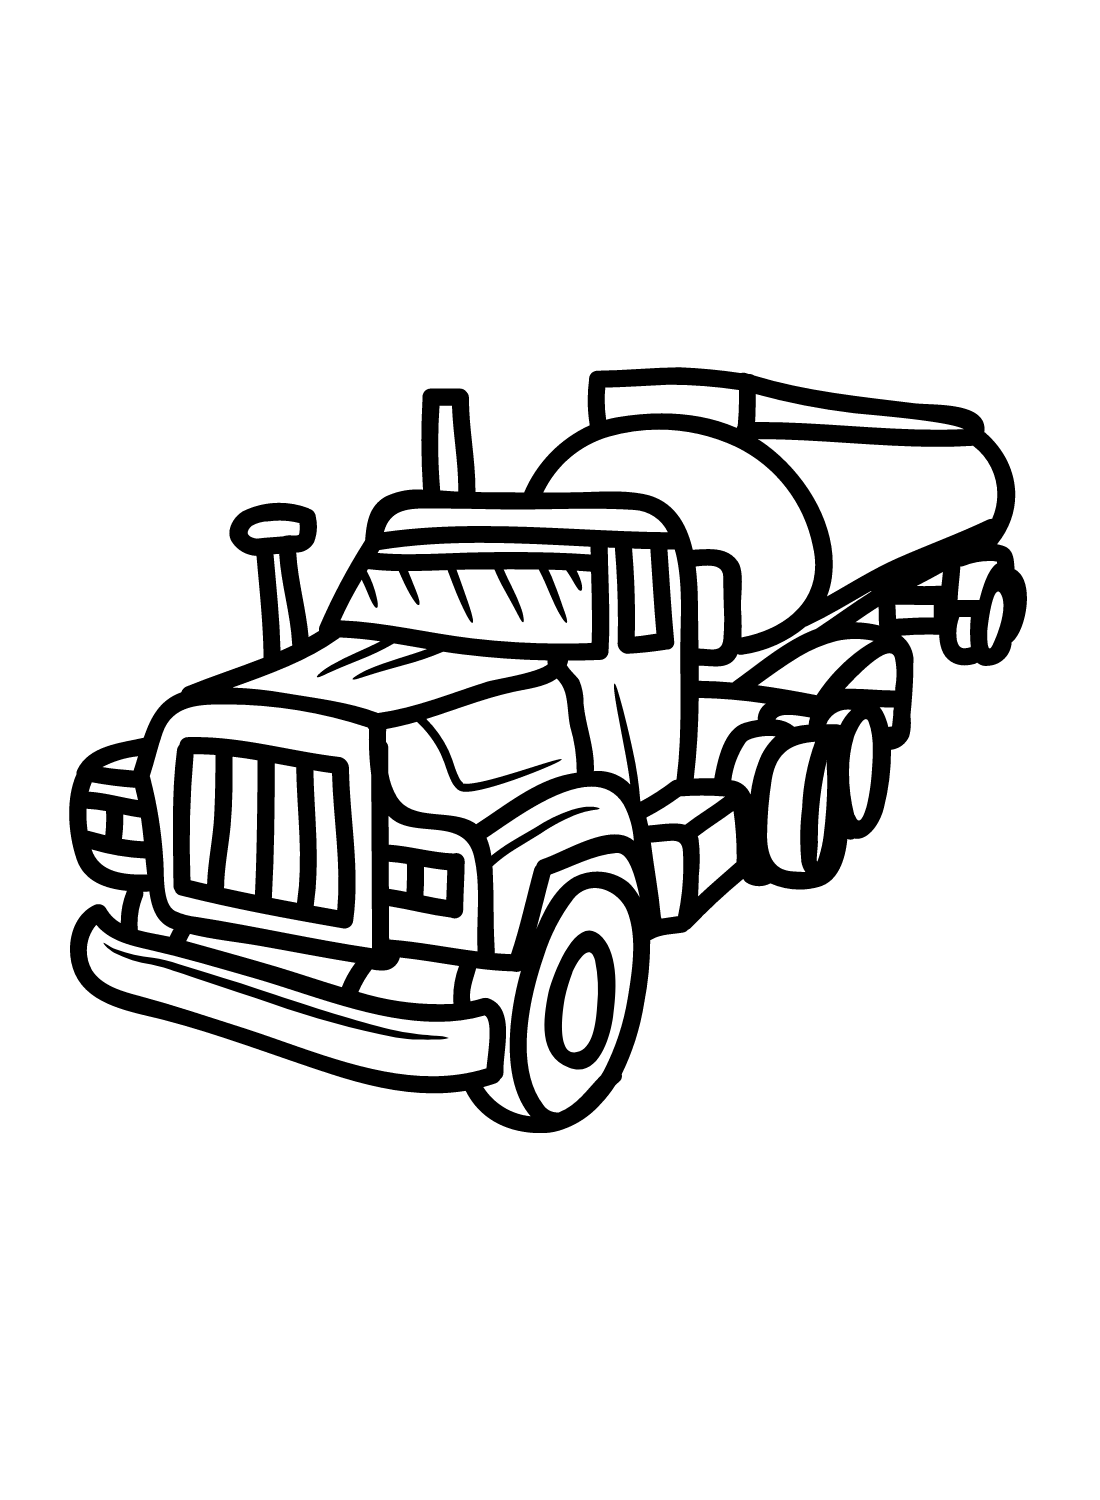 Tanker Truck Pictures Coloring Page